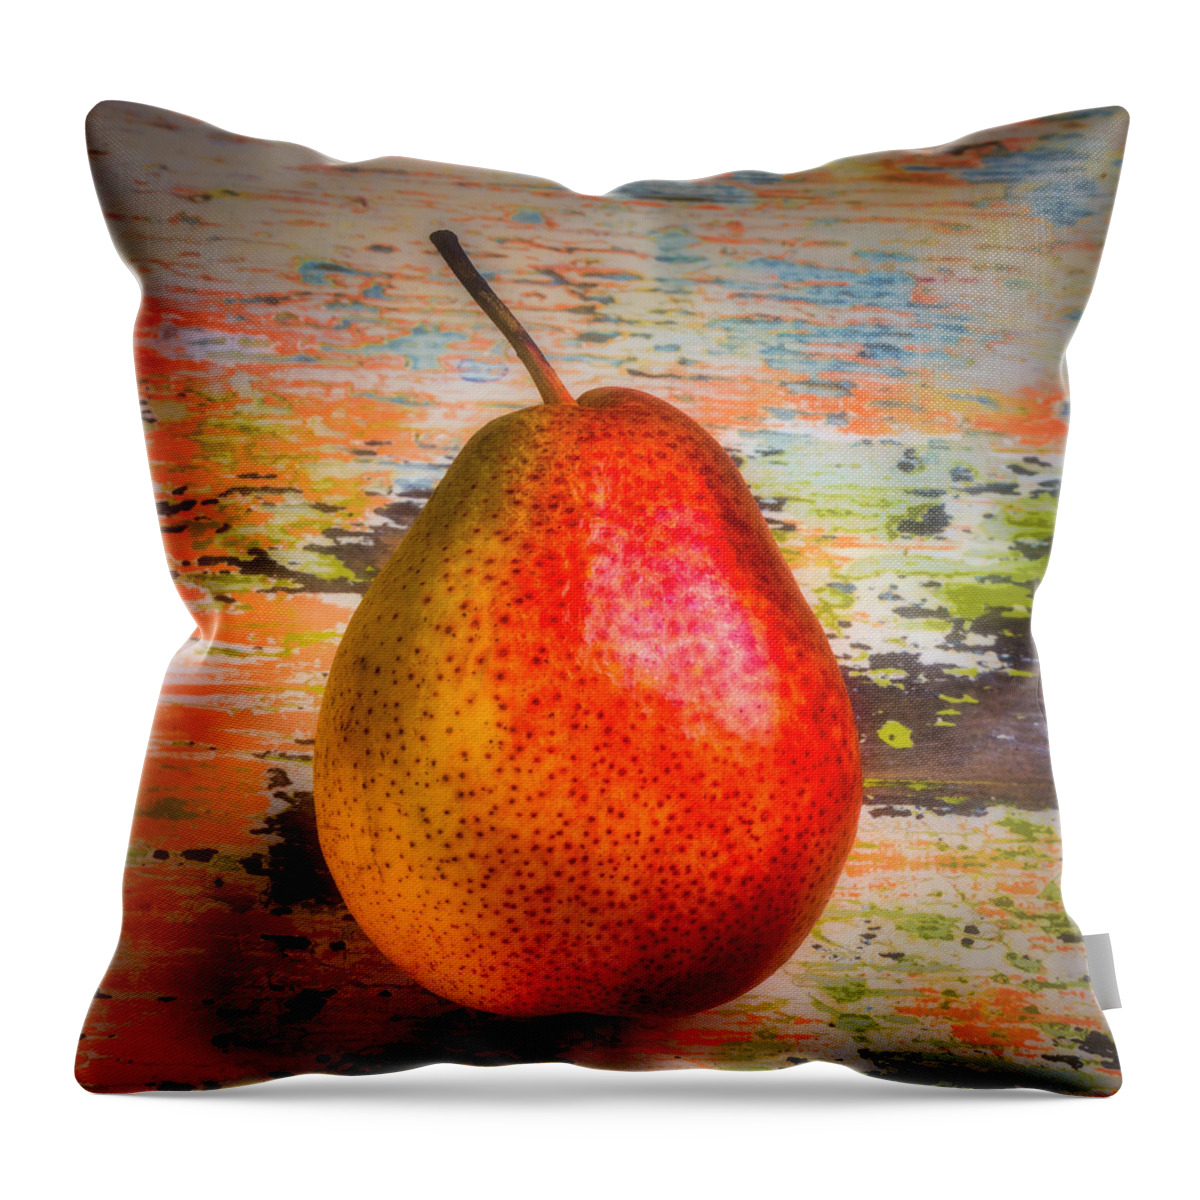 Pear Throw Pillow featuring the photograph Autumn Pear by Garry Gay